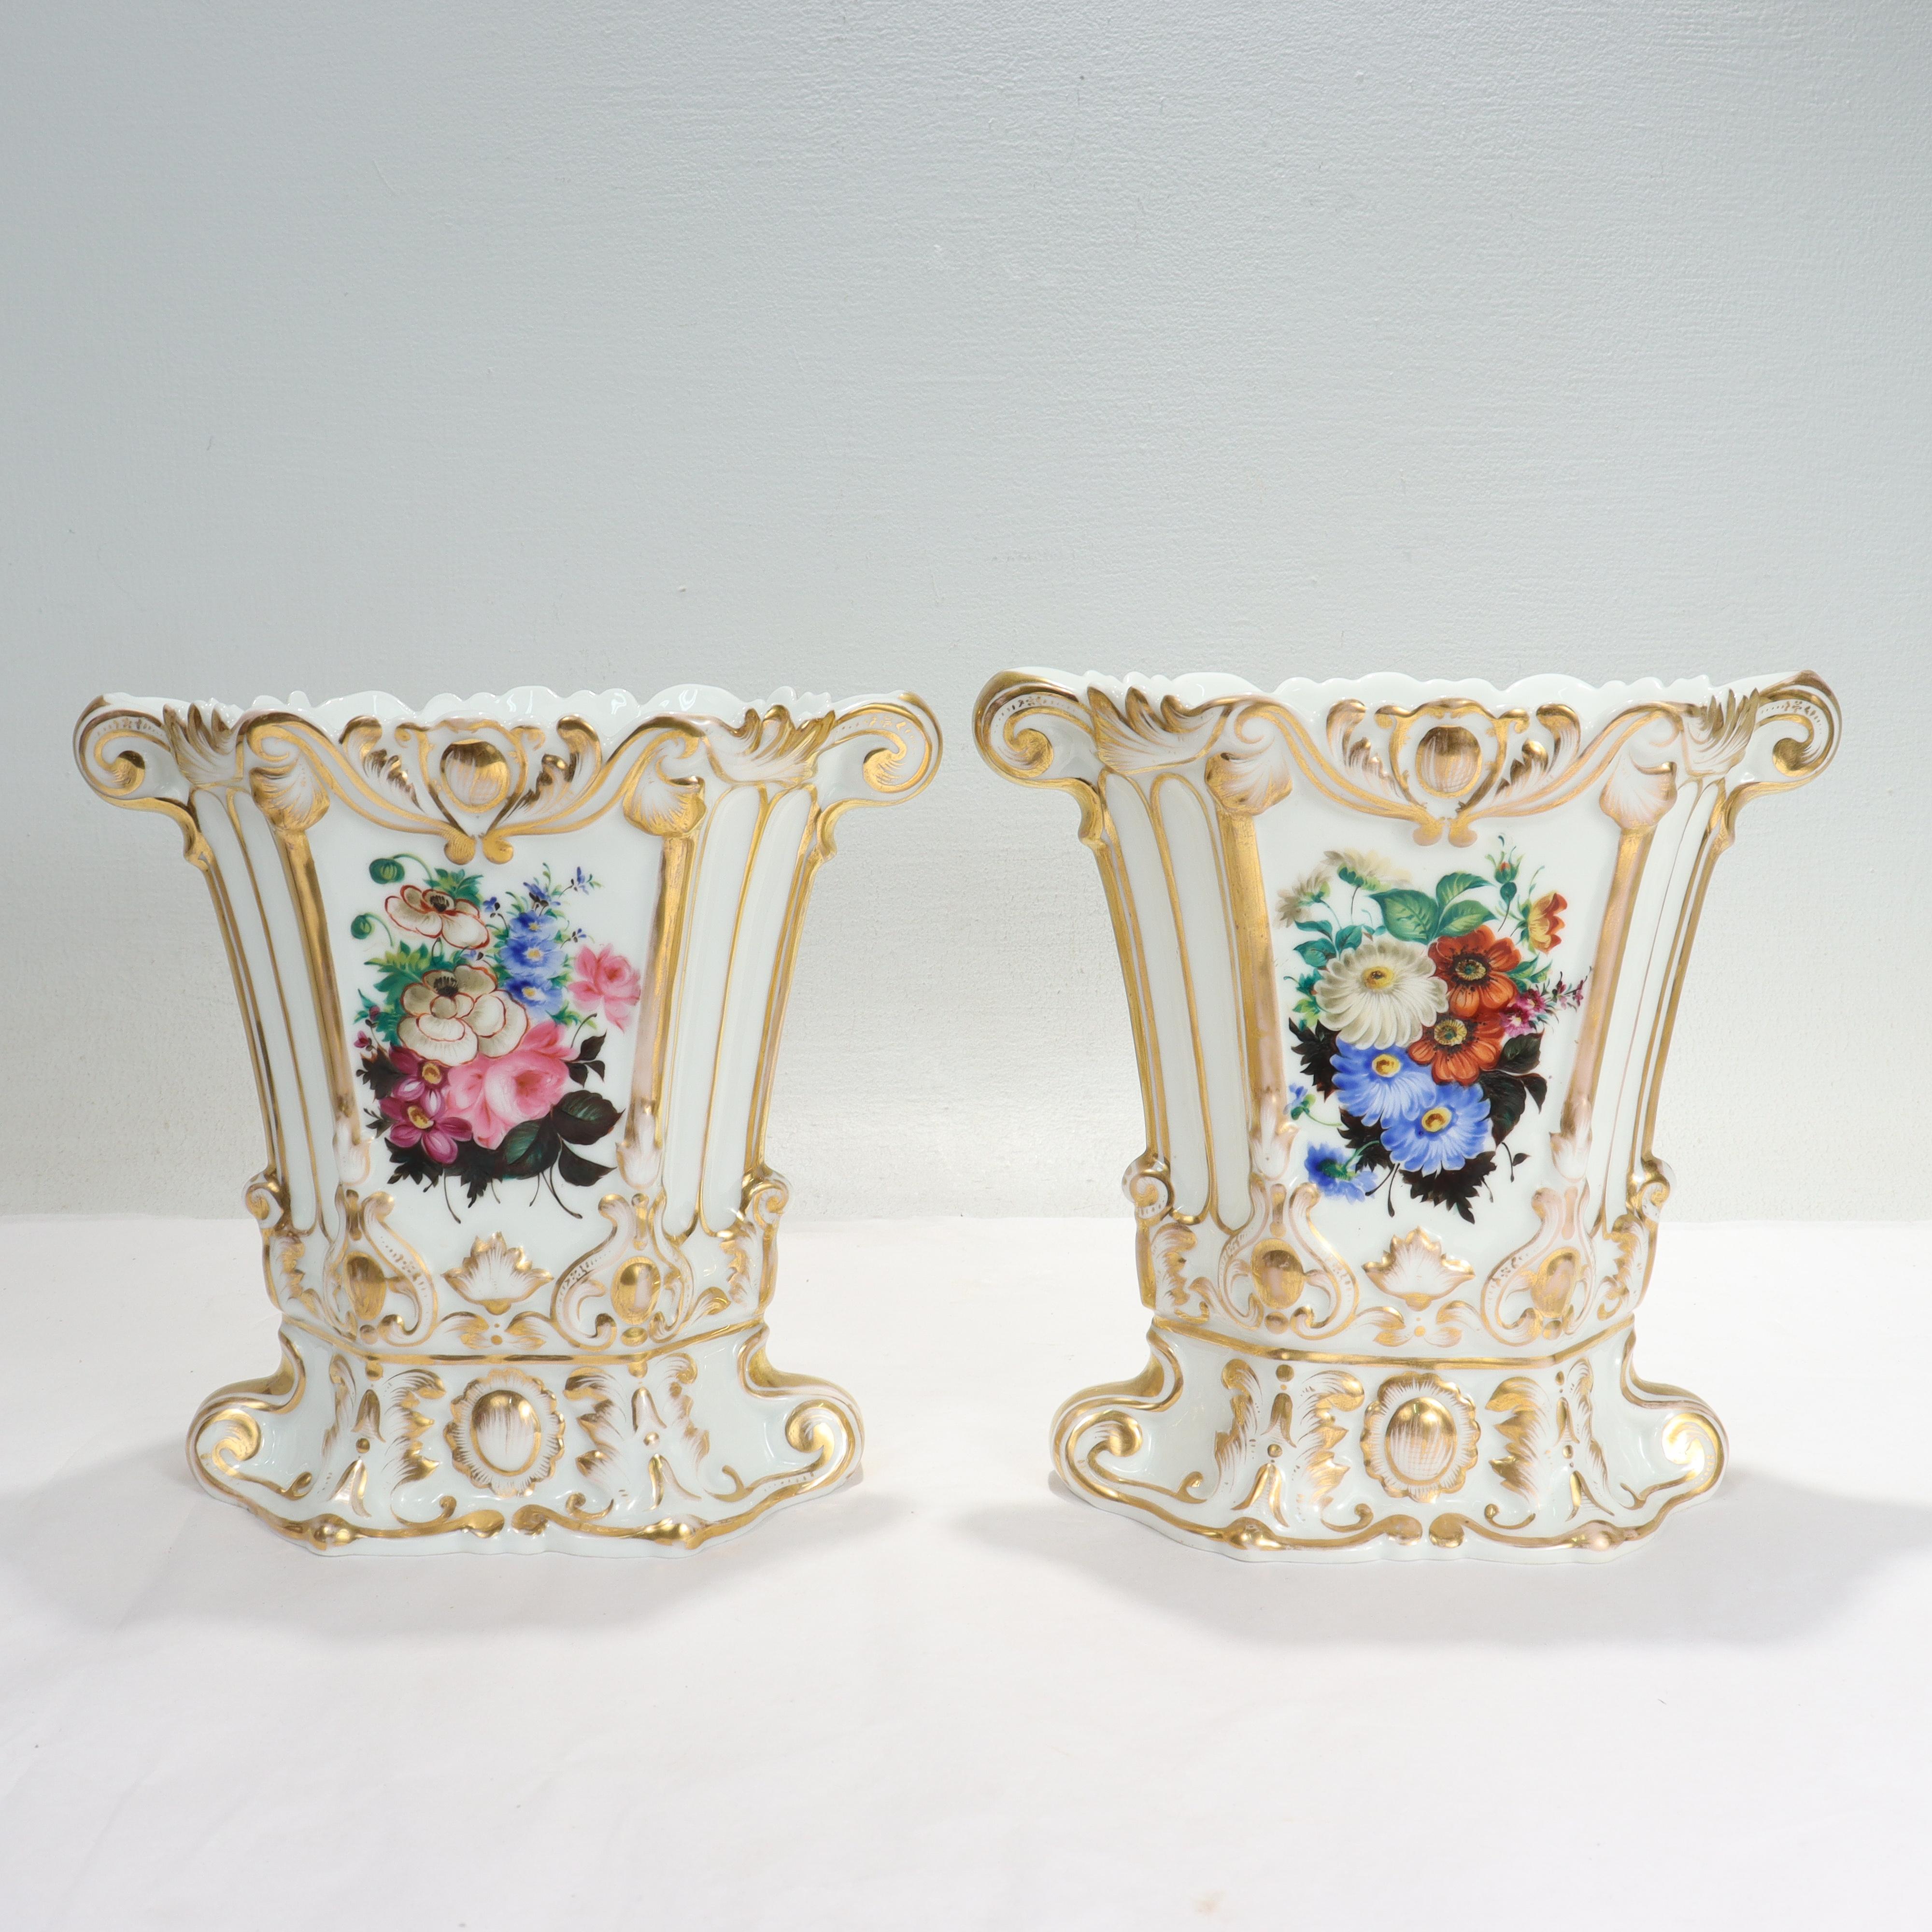 A fine pair of antique French porcelain vases.

In the style of Jacob Petit.

Each with extensive gilt decoration and painted floral decoration to either side.

Simply a great pair of Old Paris porcelain vases! 

Date:
19th